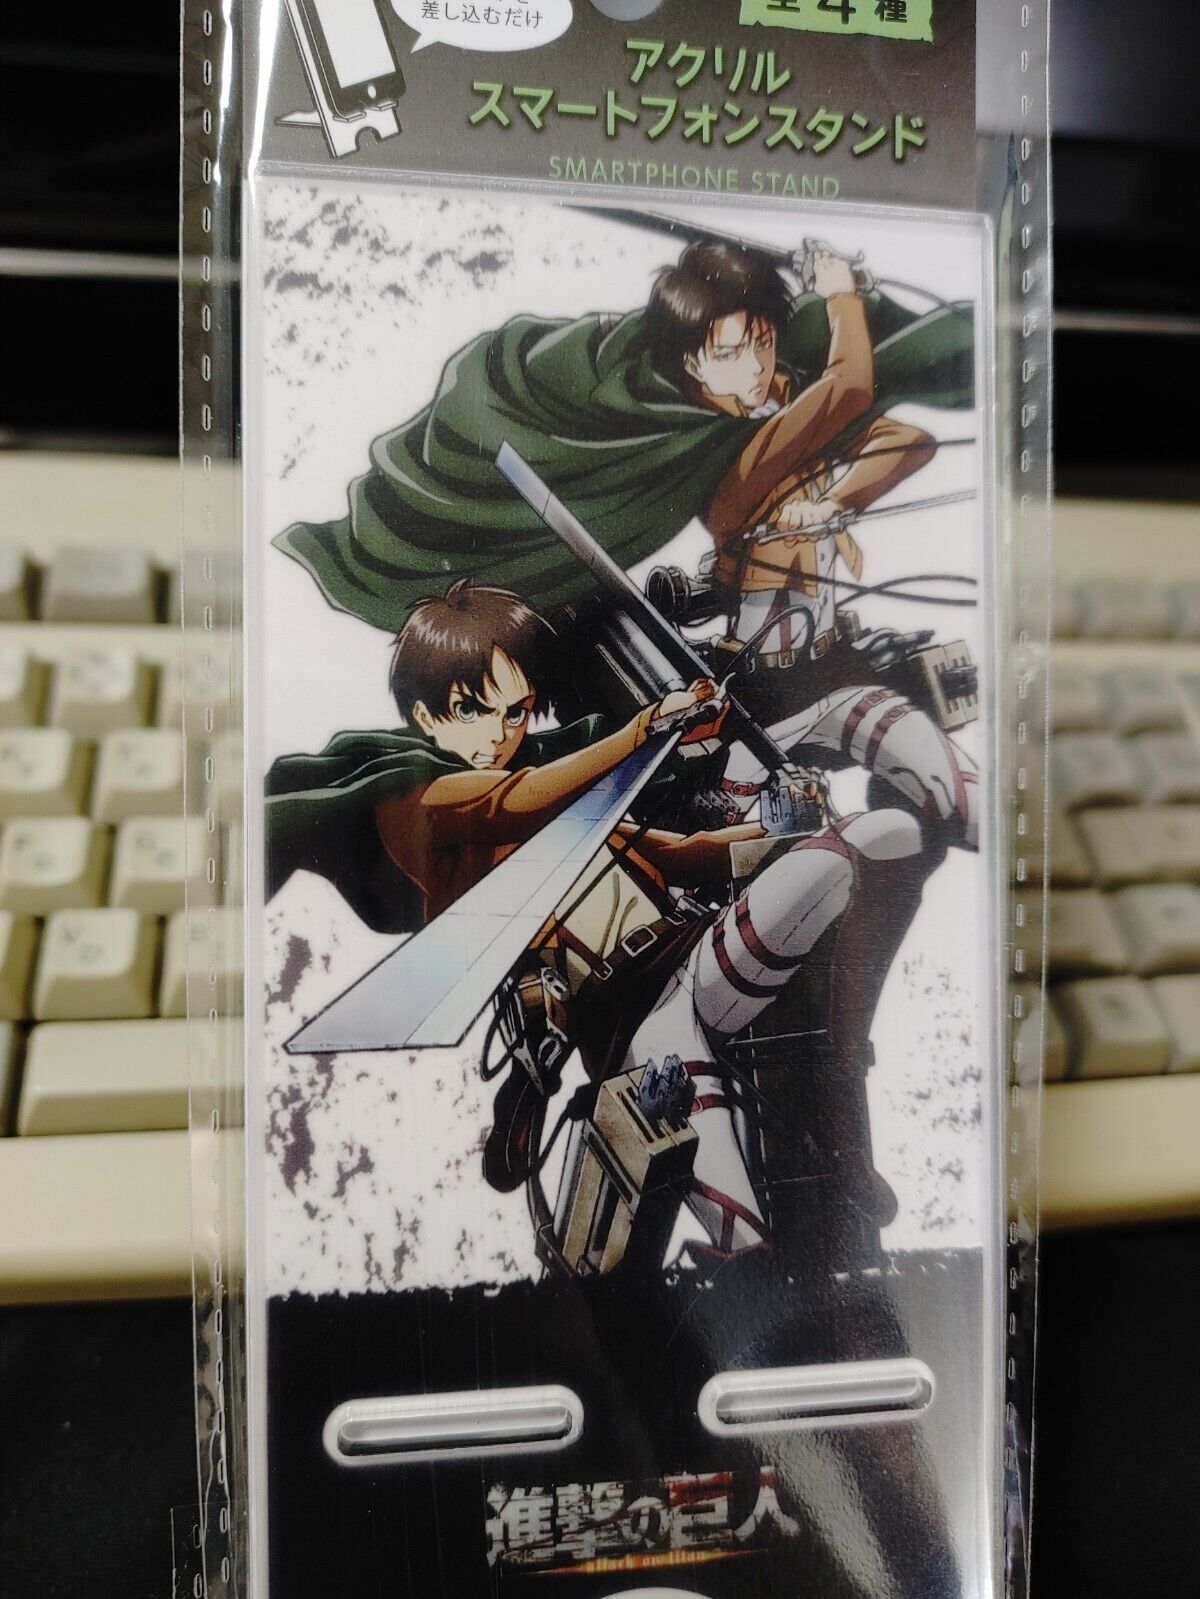 Attack on Titan Collectible Acrylic Design Smart Phone Stand GOODS JAPAN B